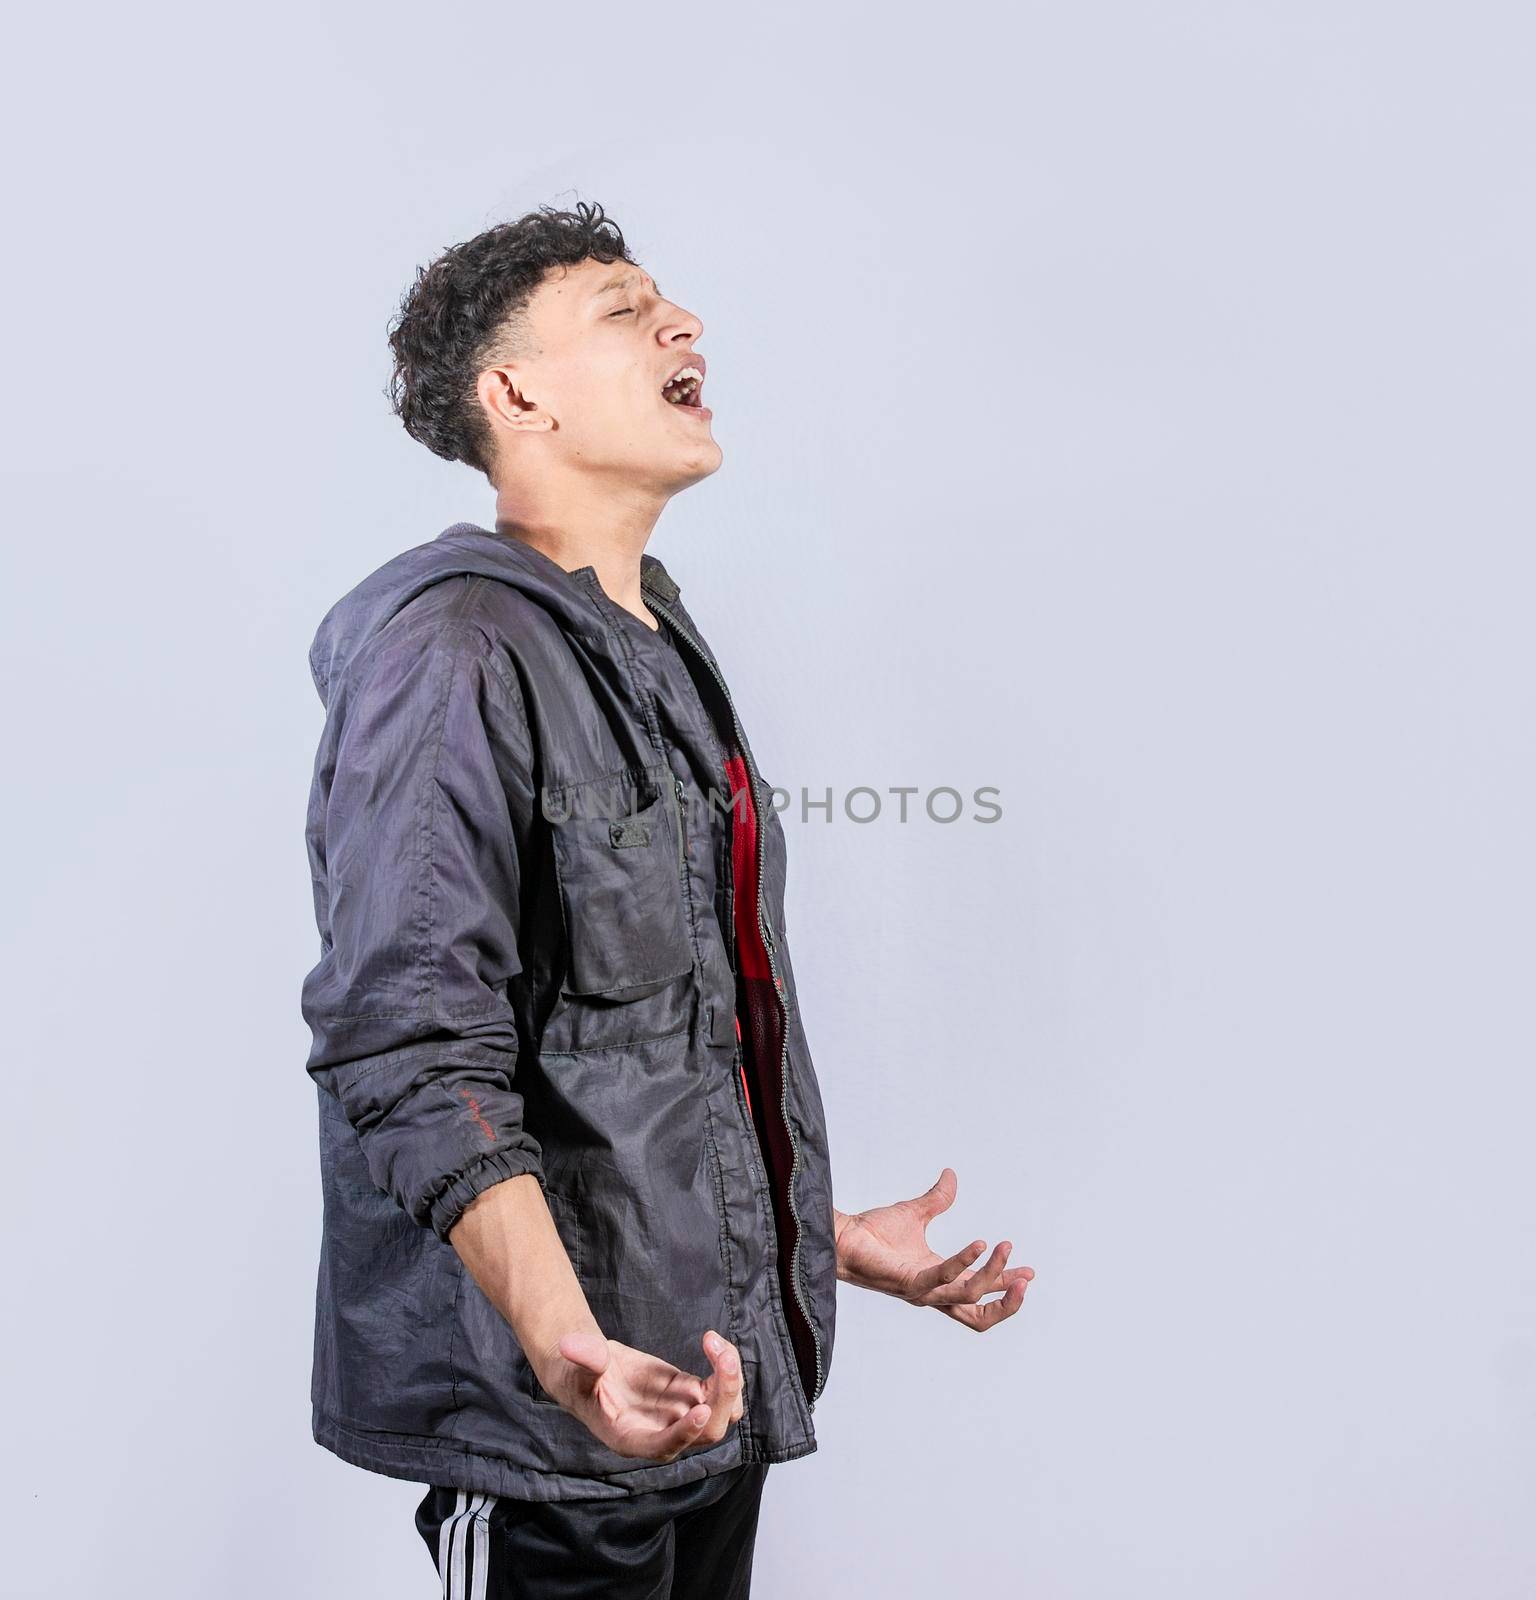 Guy screaming loud, isolated space, desperate man yelling on isolated background, frustrated young man yelling on white background